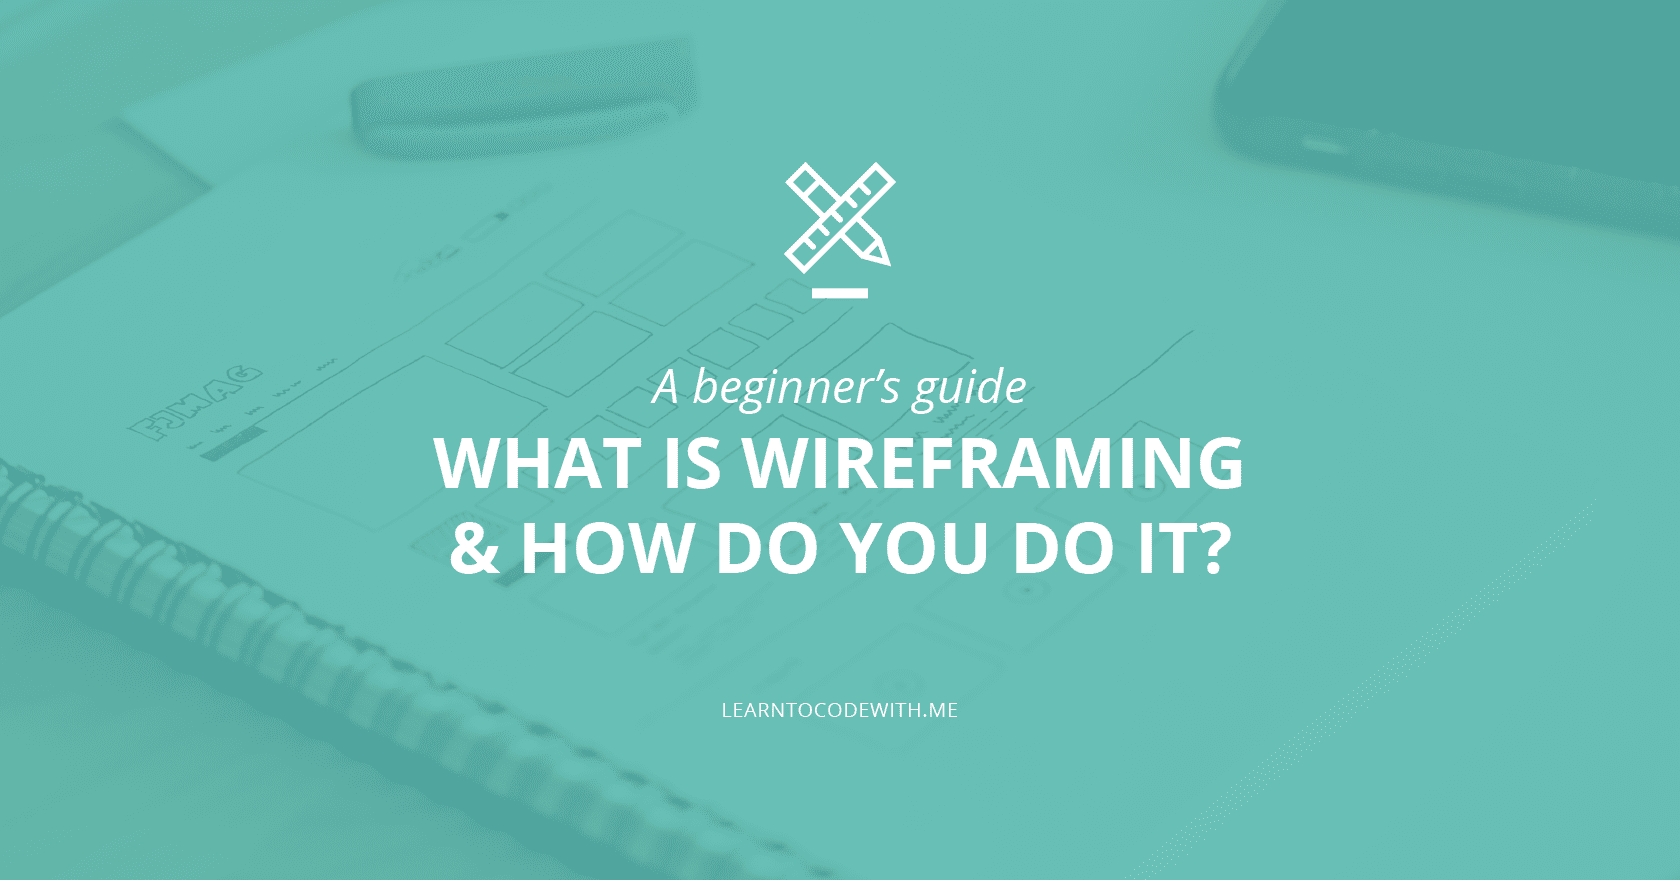 What is wireframing?